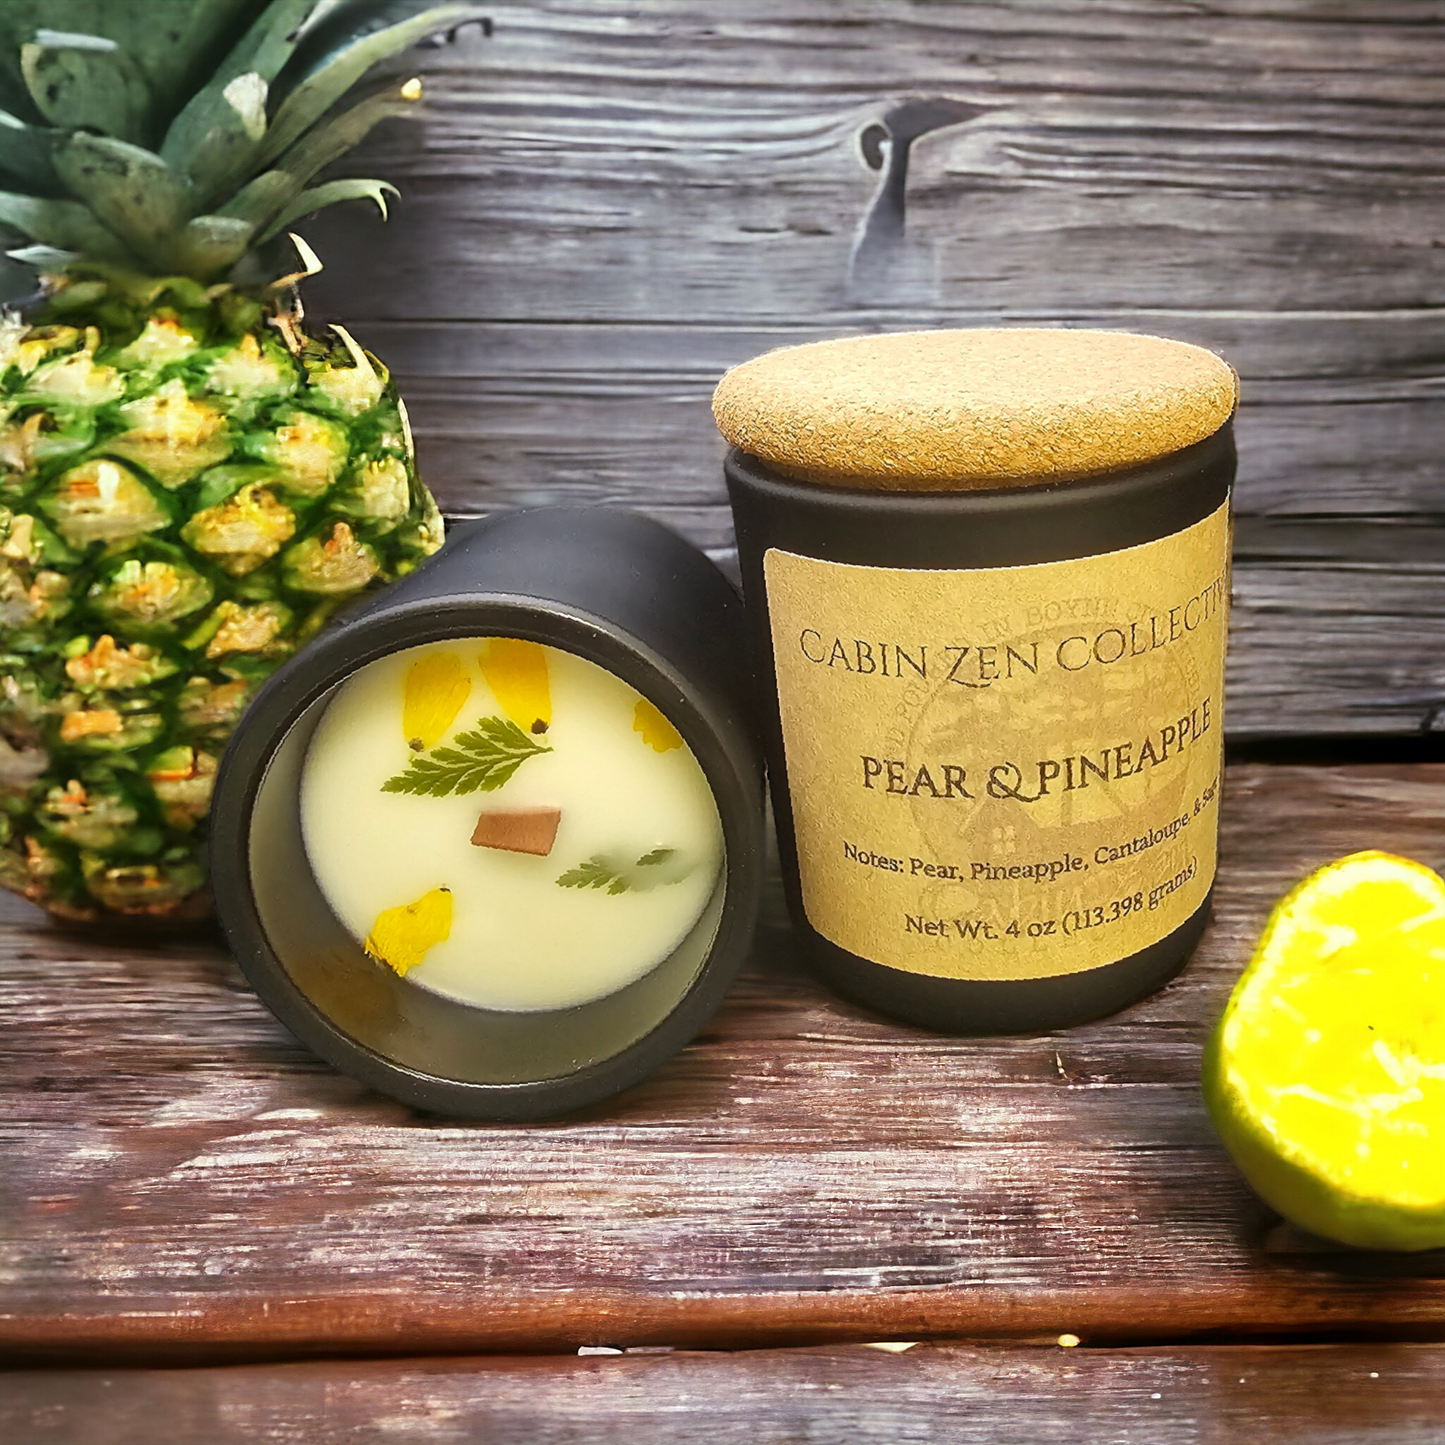 Pear & Pineapple Refillable Candle